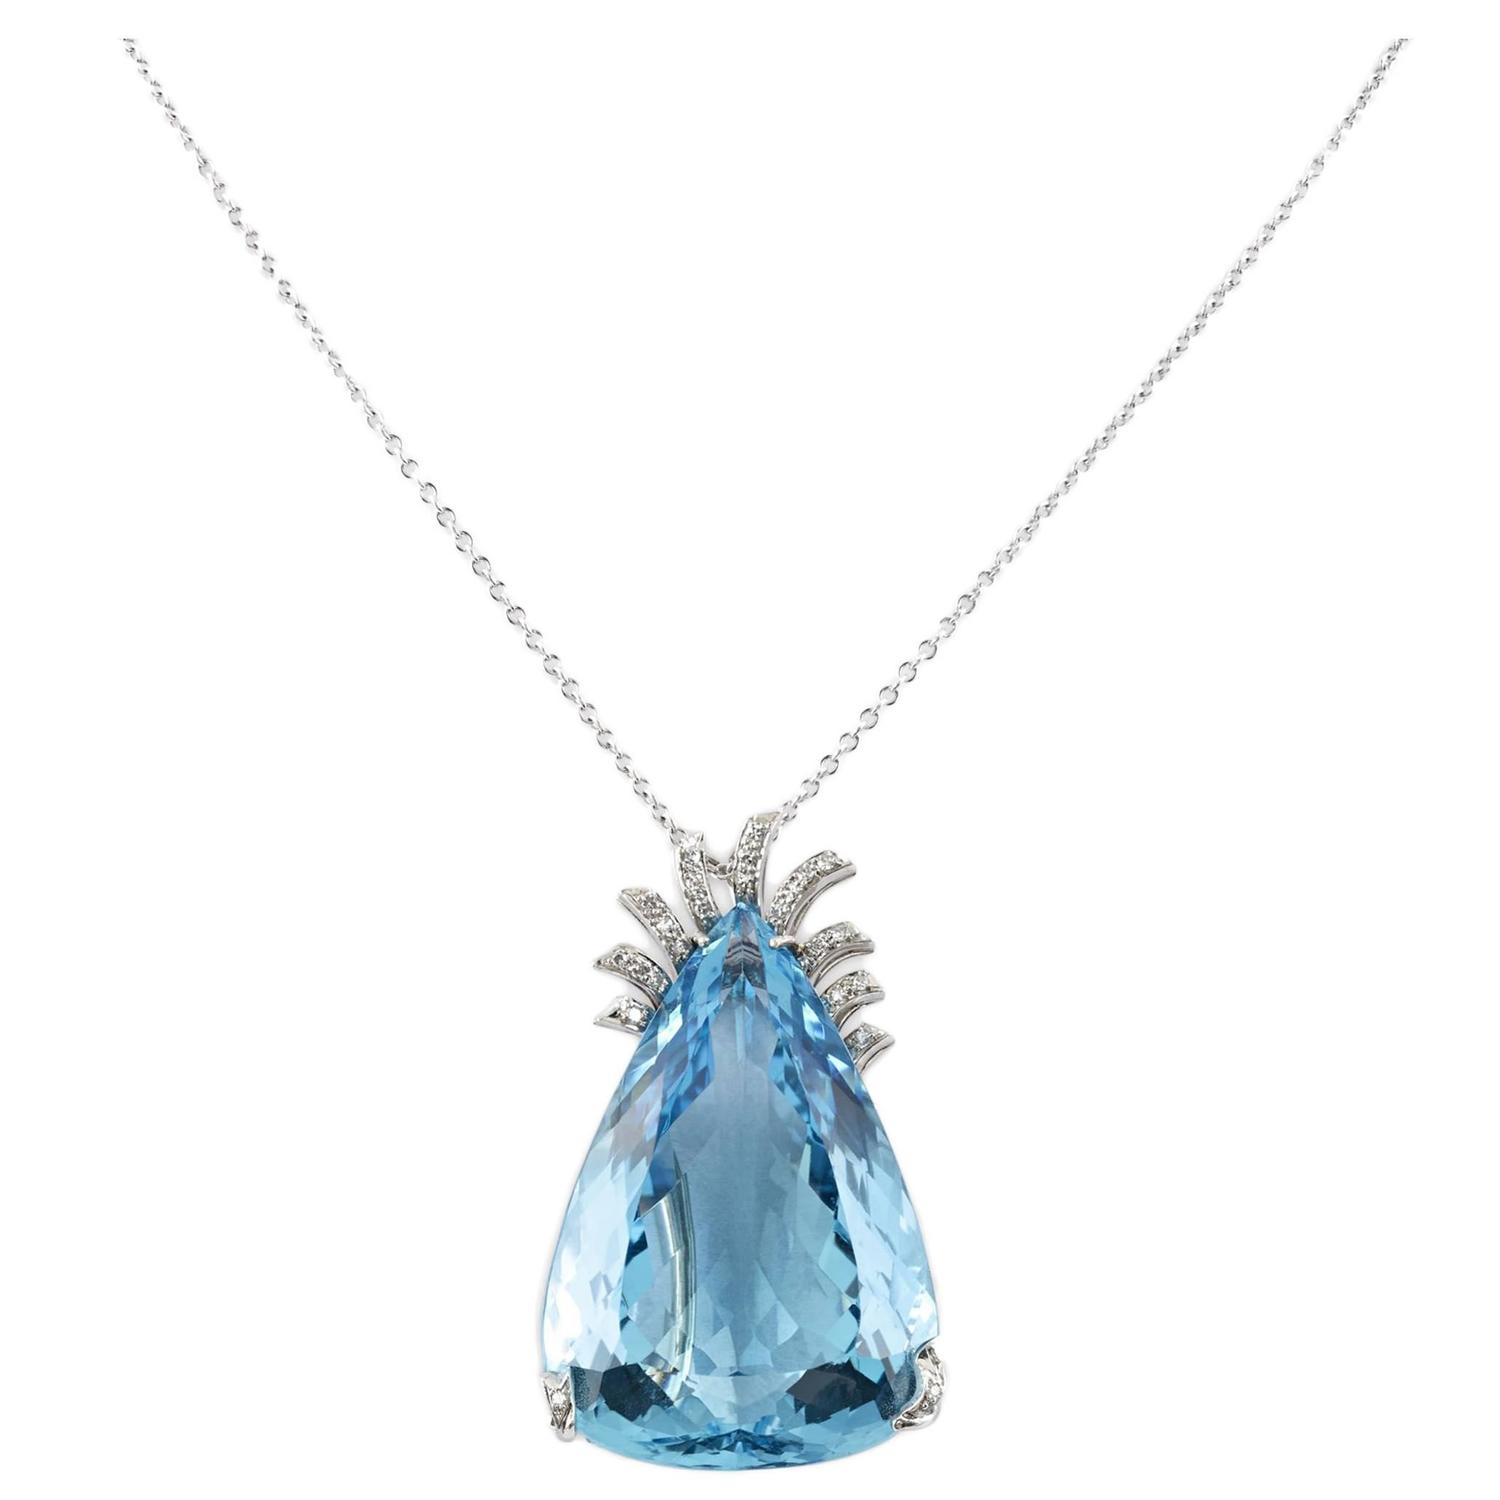 86.40 Carats Aquamarine Convertible Pendant and Brooch For Sale at 1stdibs